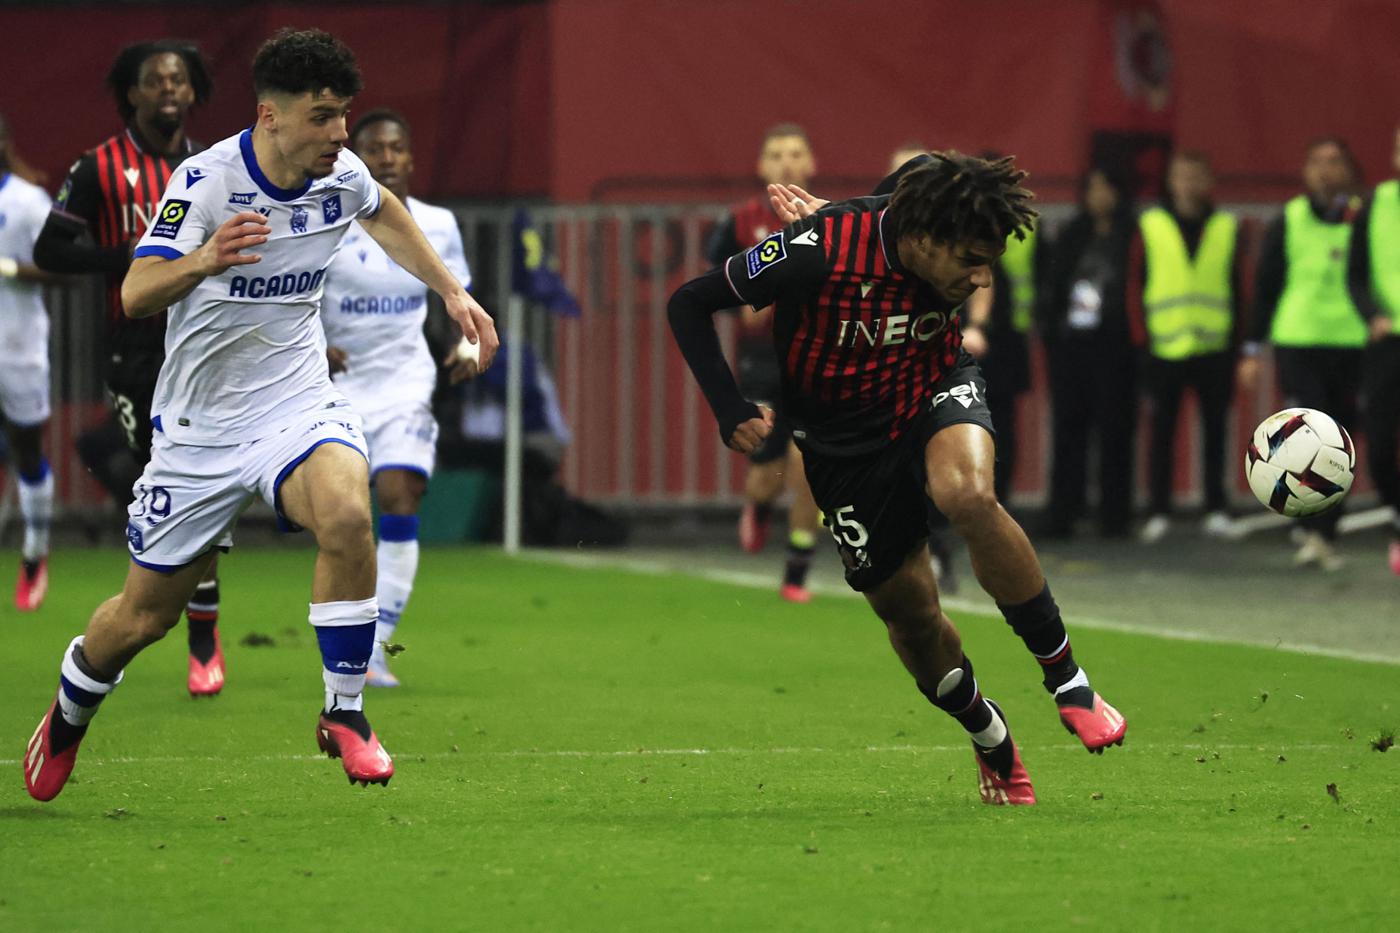 Nice vs Auxerre - 1:1. French Championship, 26th round. Match review, statistics.